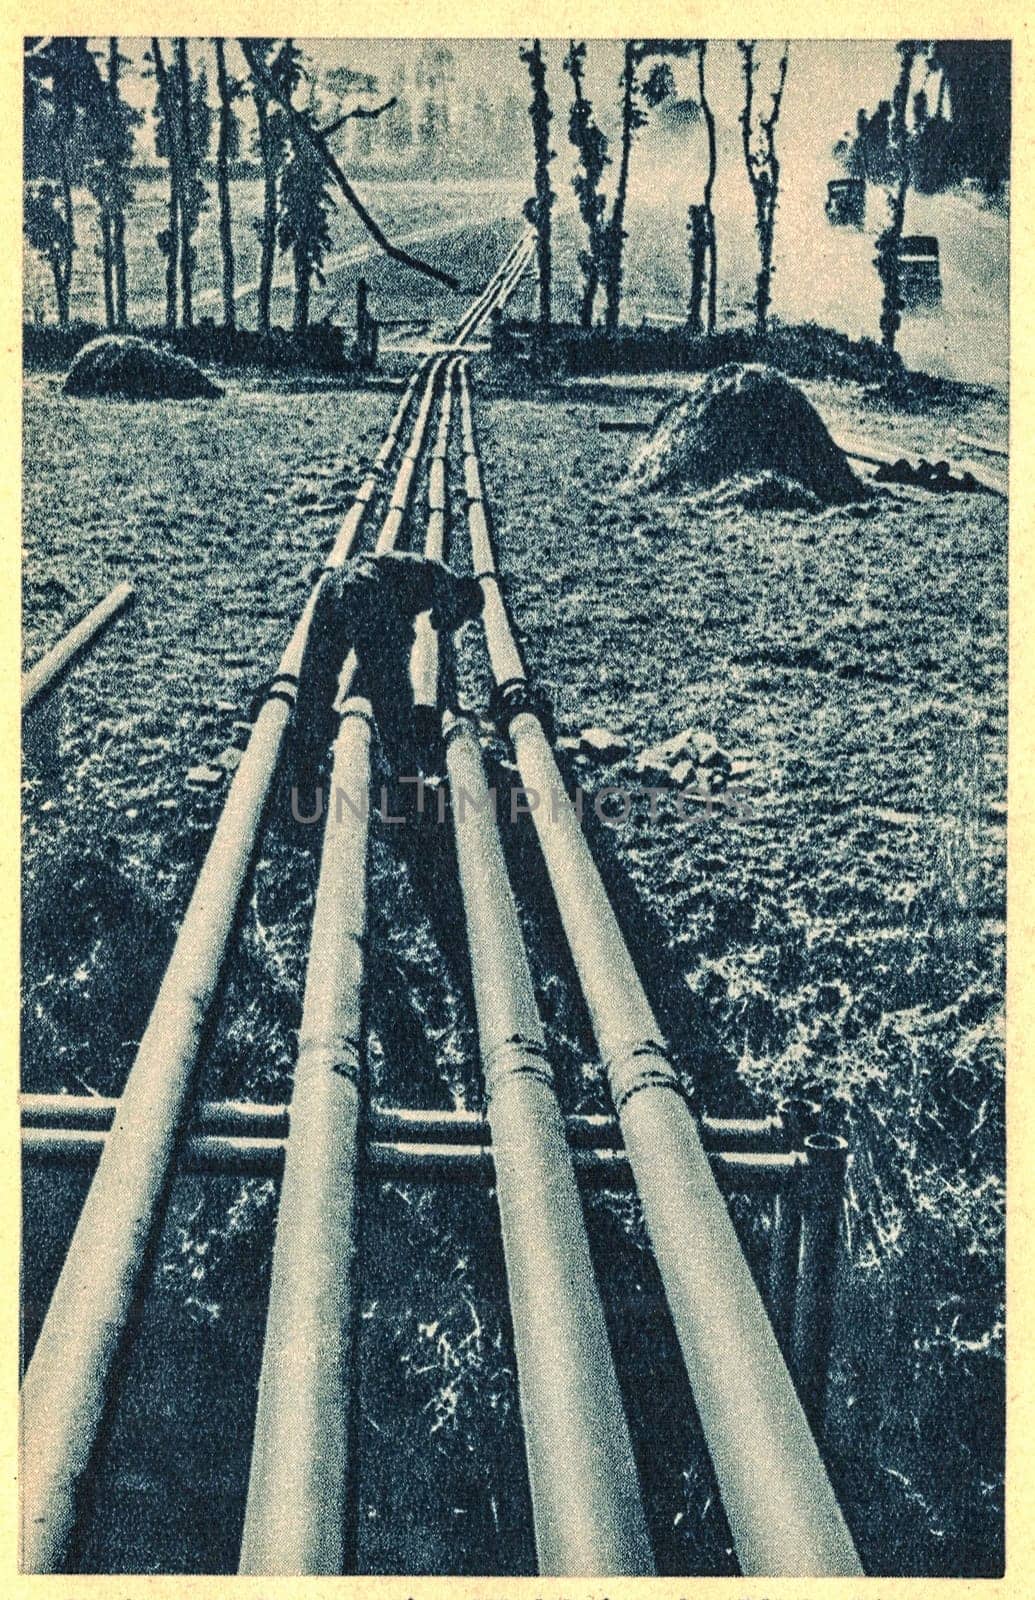 ENGLAND - CIRCA 1944: Fuel pipes for war troops. The Petroleum Warfare Department (PWD) was an organisation established in Britain in 1940 in response to the invasion crisis during World War II, when it appeared that Germany would invade the country.